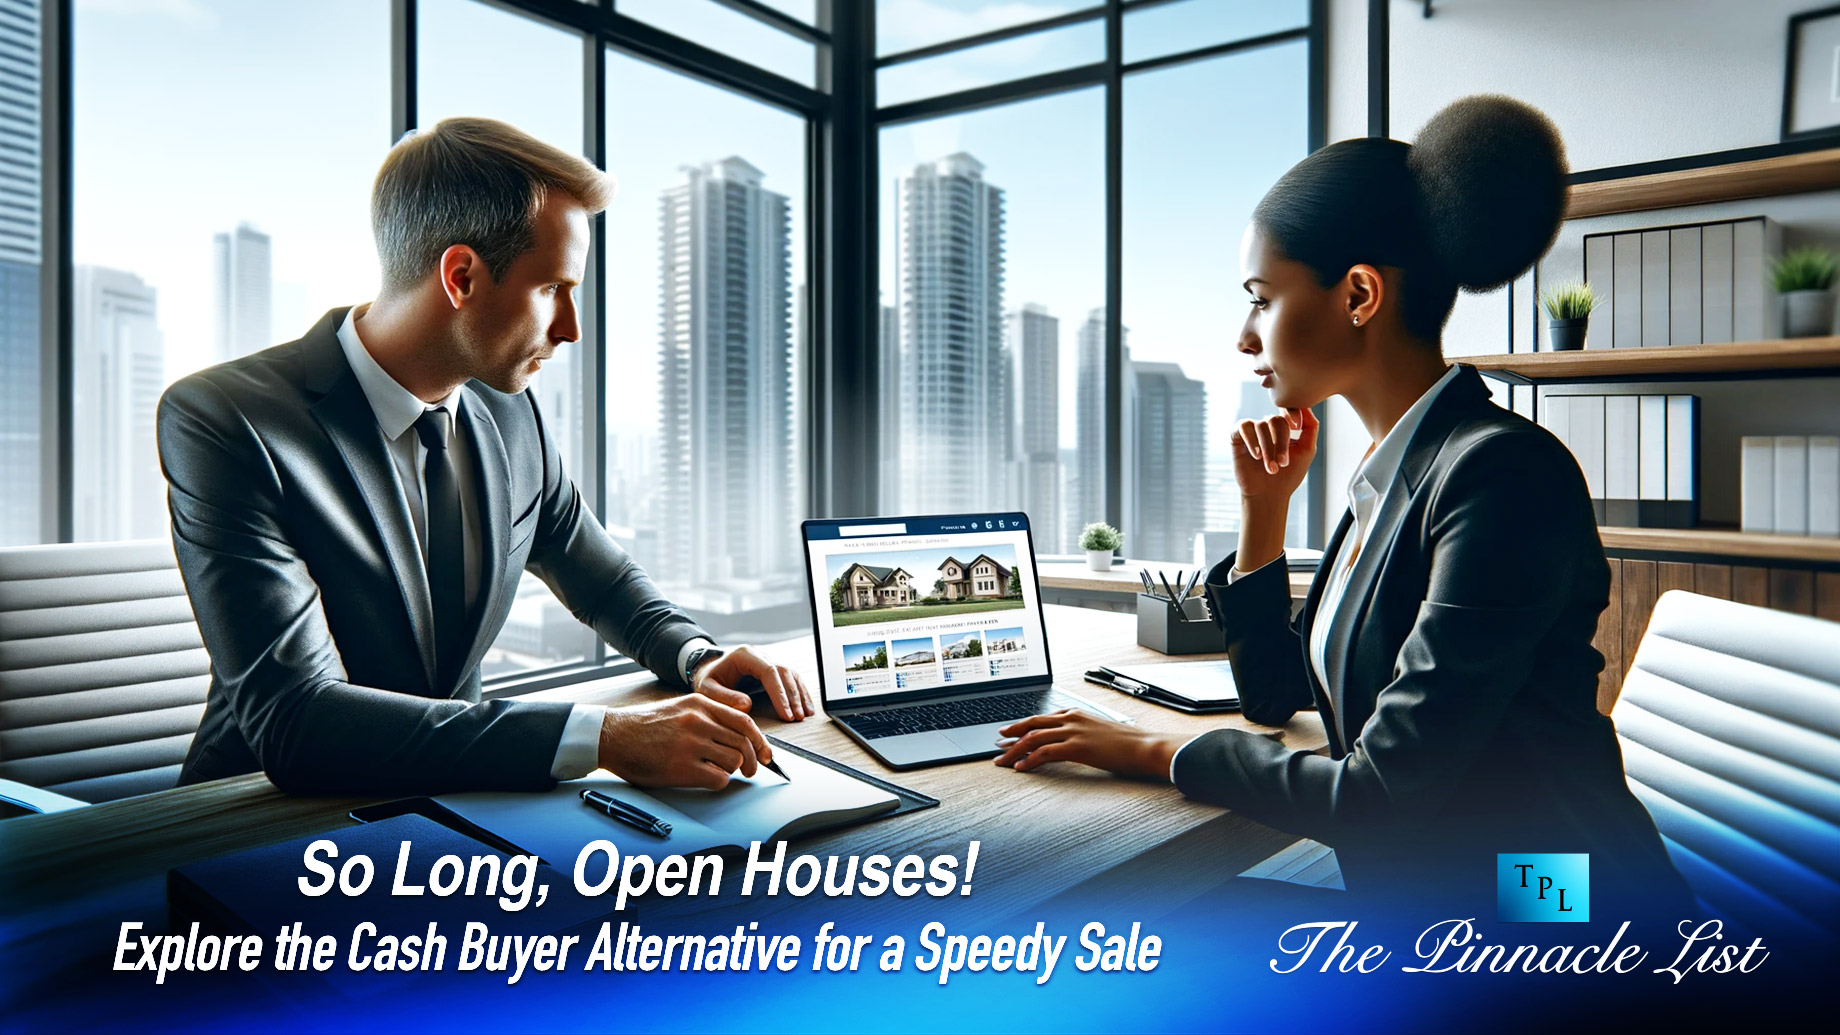 So Long, Open Houses! Explore the Cash Buyer Alternative for a Speedy Sale